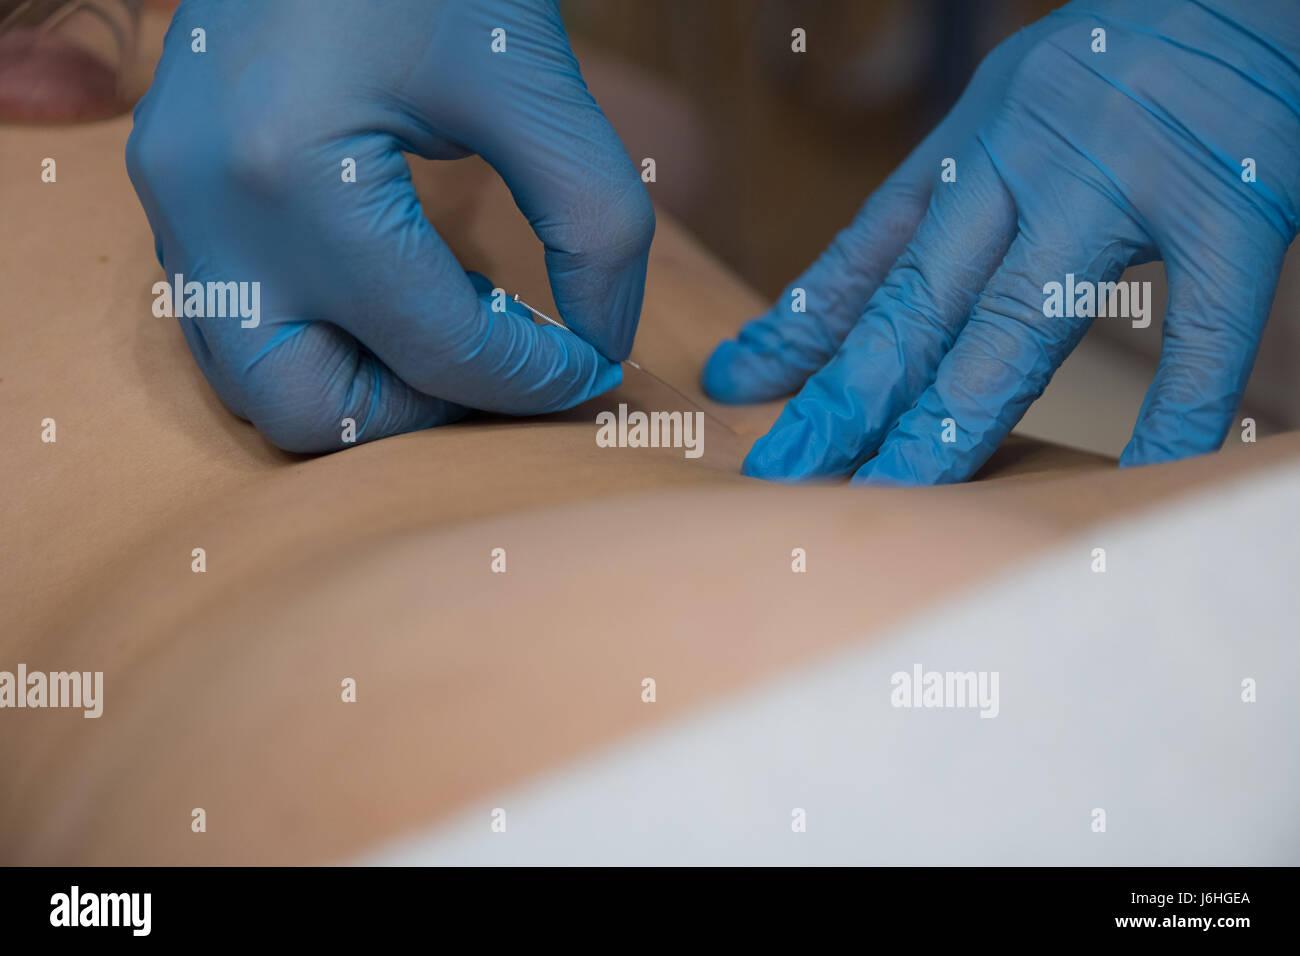 Dry needling technique by a physical therapist Stock Photo